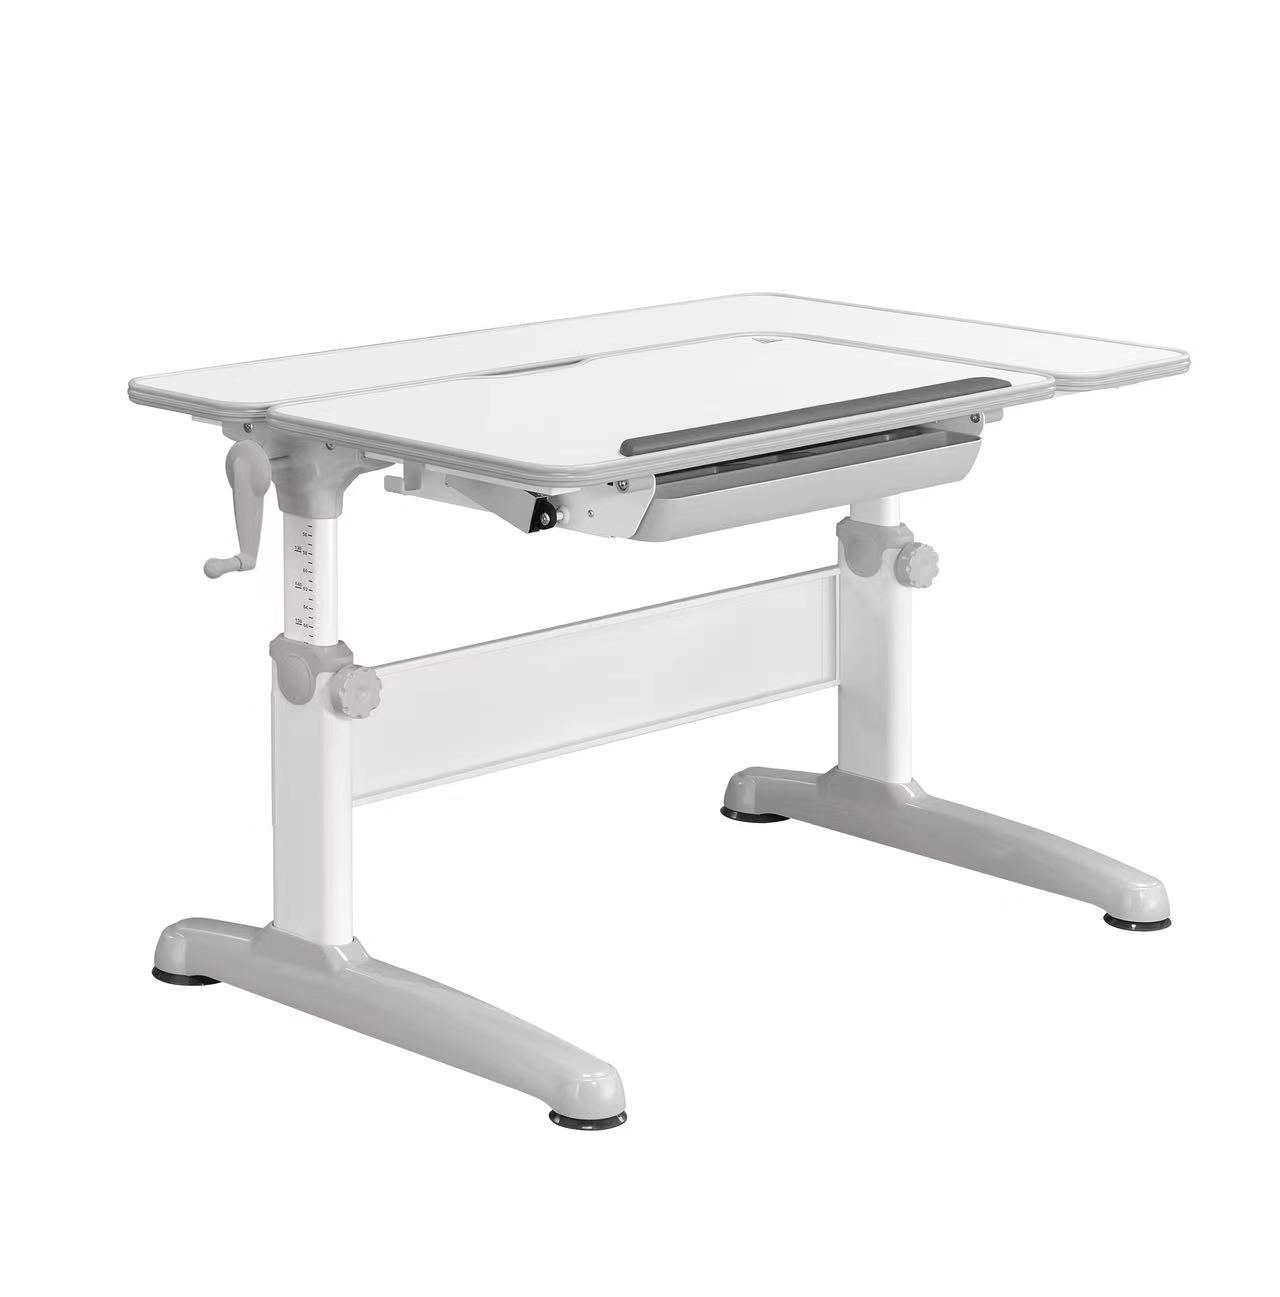 Childrens study desk gray -learning stations that are height-adjustable, tilt-adjustable, and grow with the child – simply ergonomic with chair